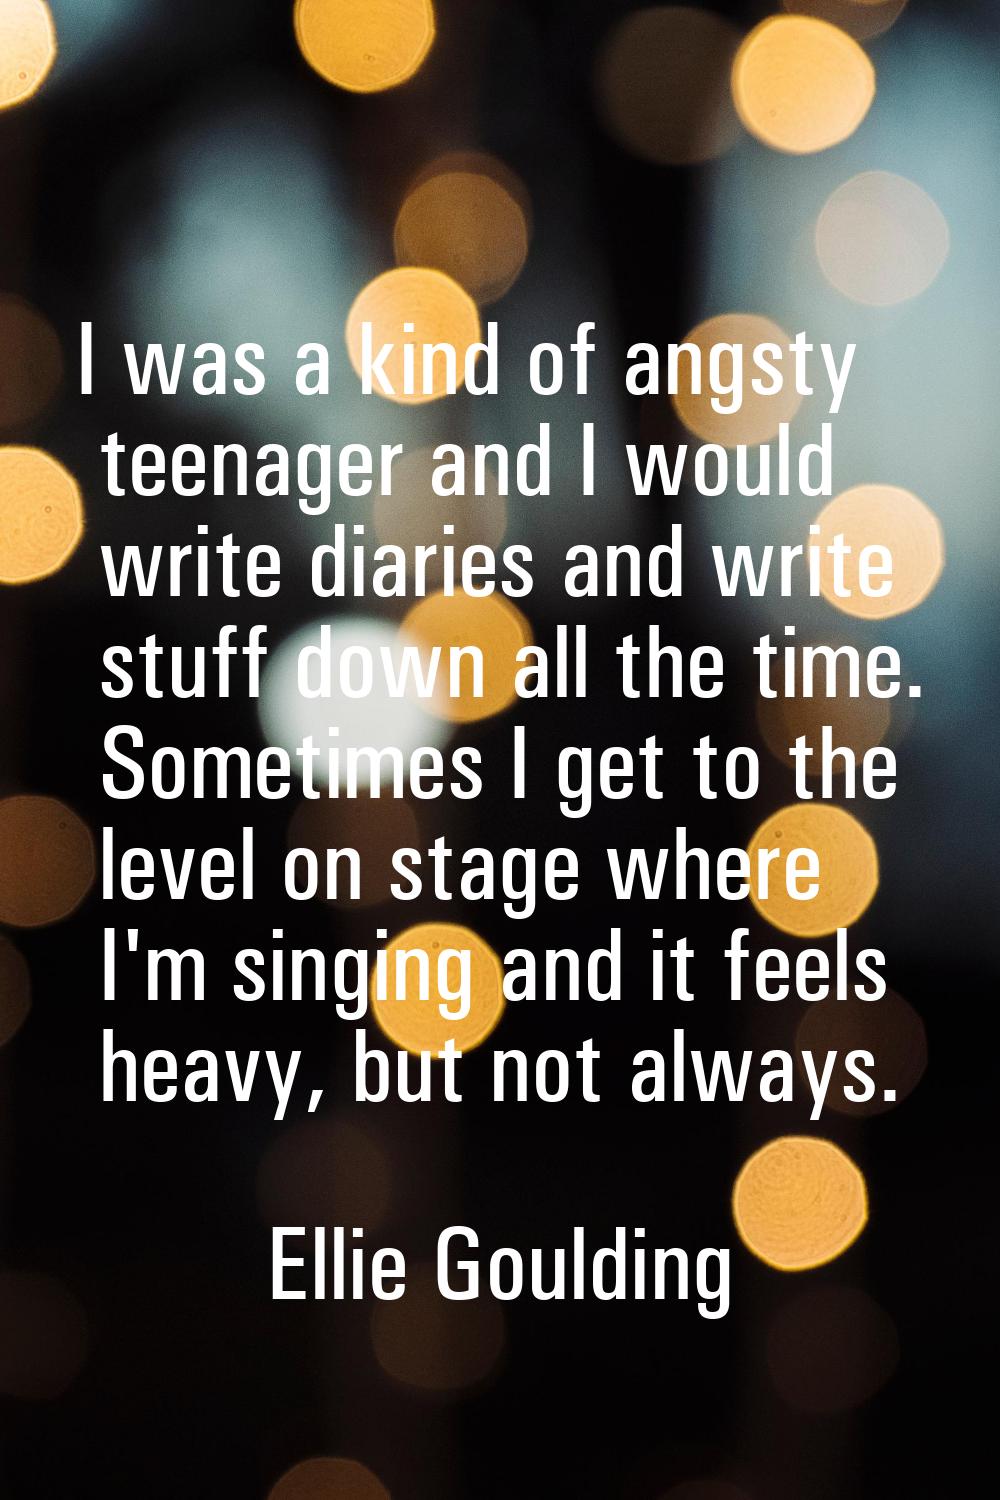 I was a kind of angsty teenager and I would write diaries and write stuff down all the time. Someti